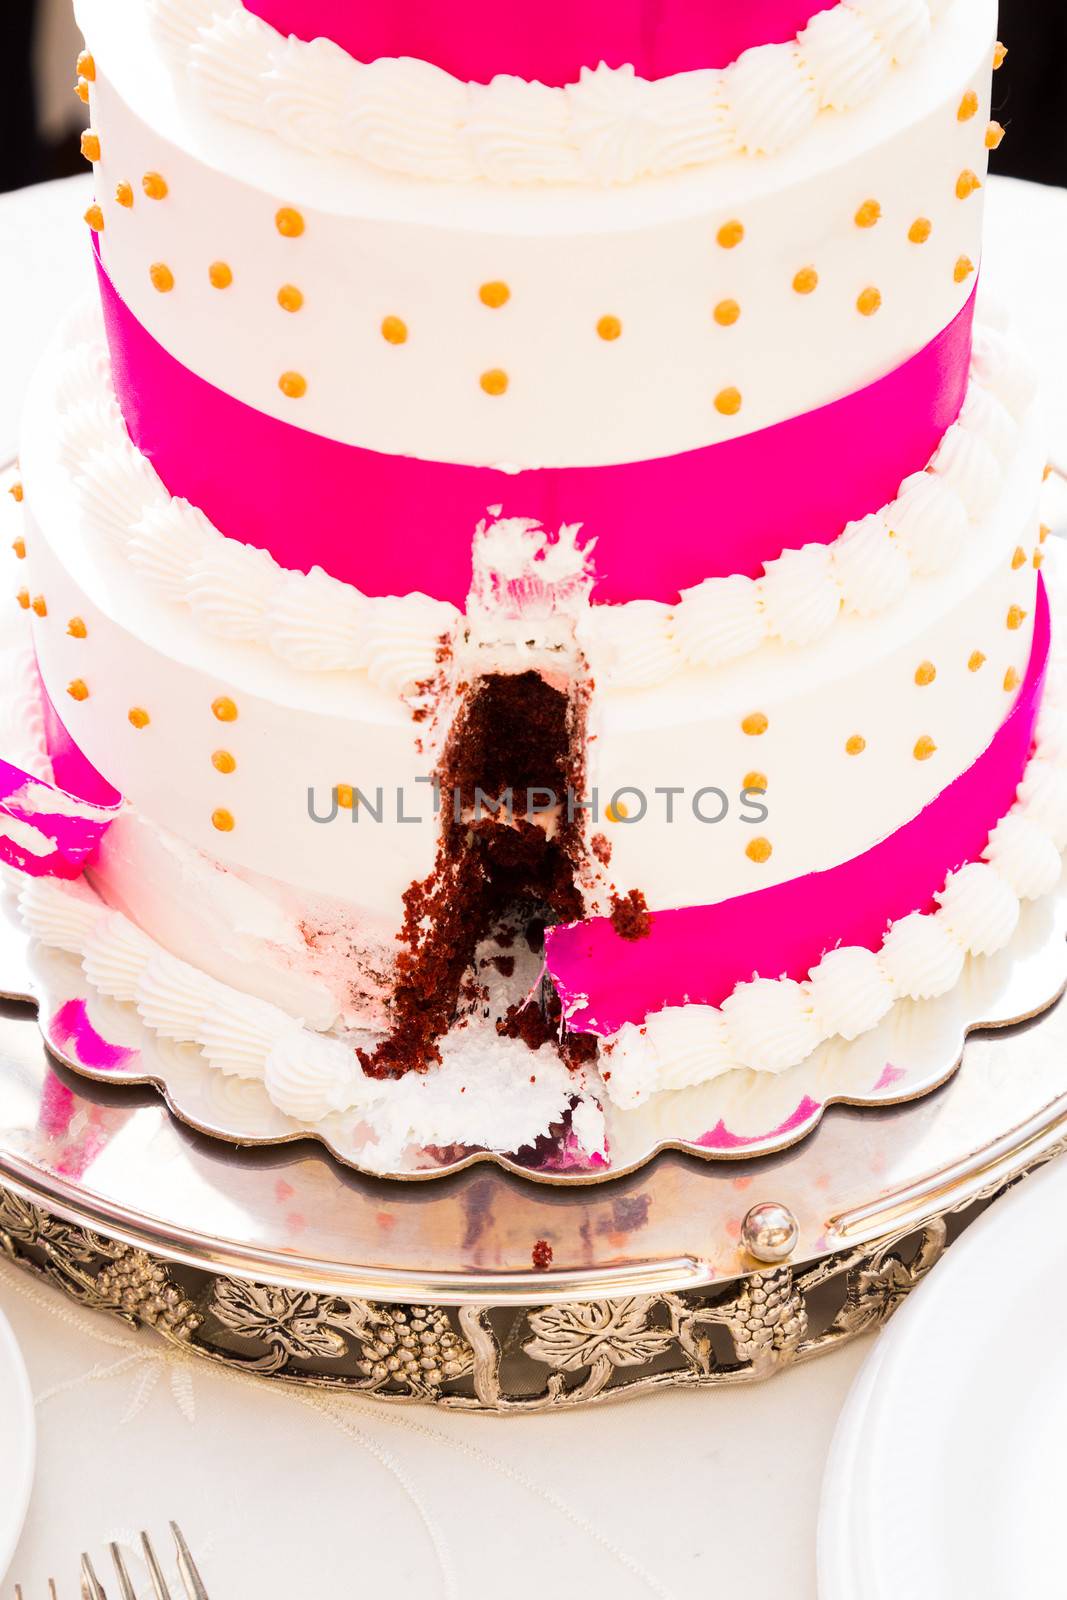 A wedding cake has a missing slice after the bride and groom cut the cake at their reception.